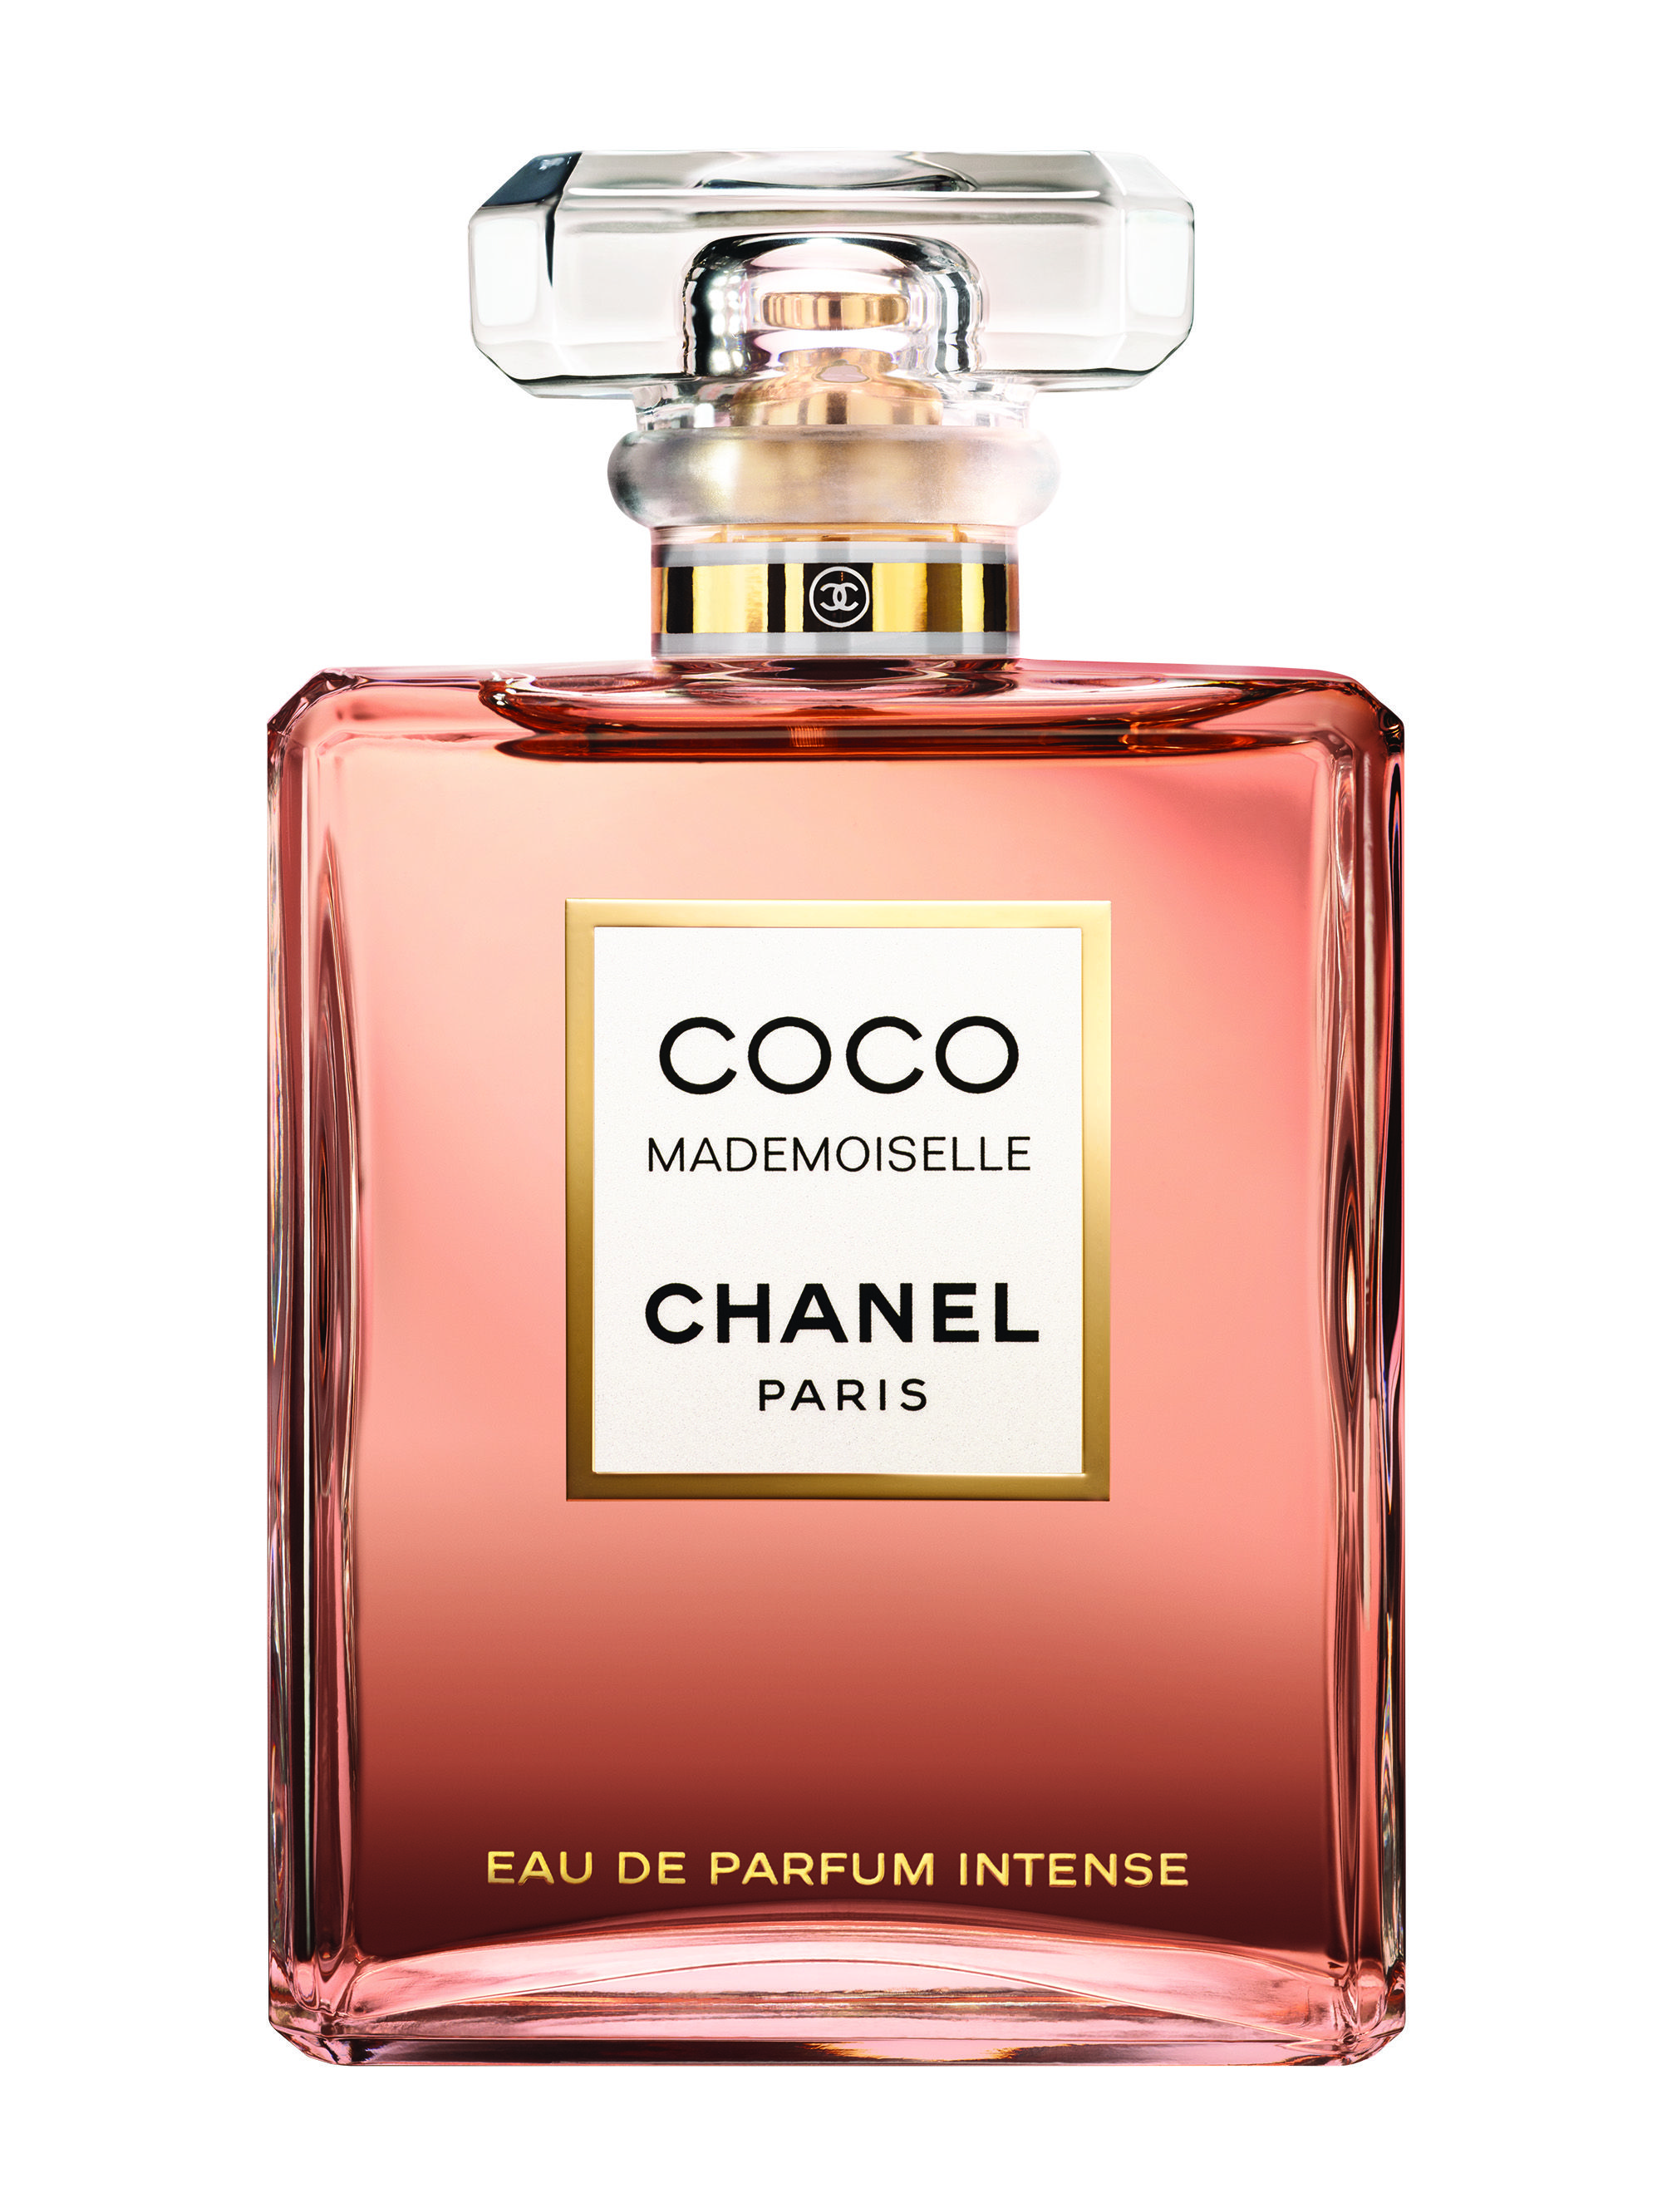 Stream coco mademoiselle eau de parfum intense the film with keira  knightley chanel fragrance by Guo Hui officiall